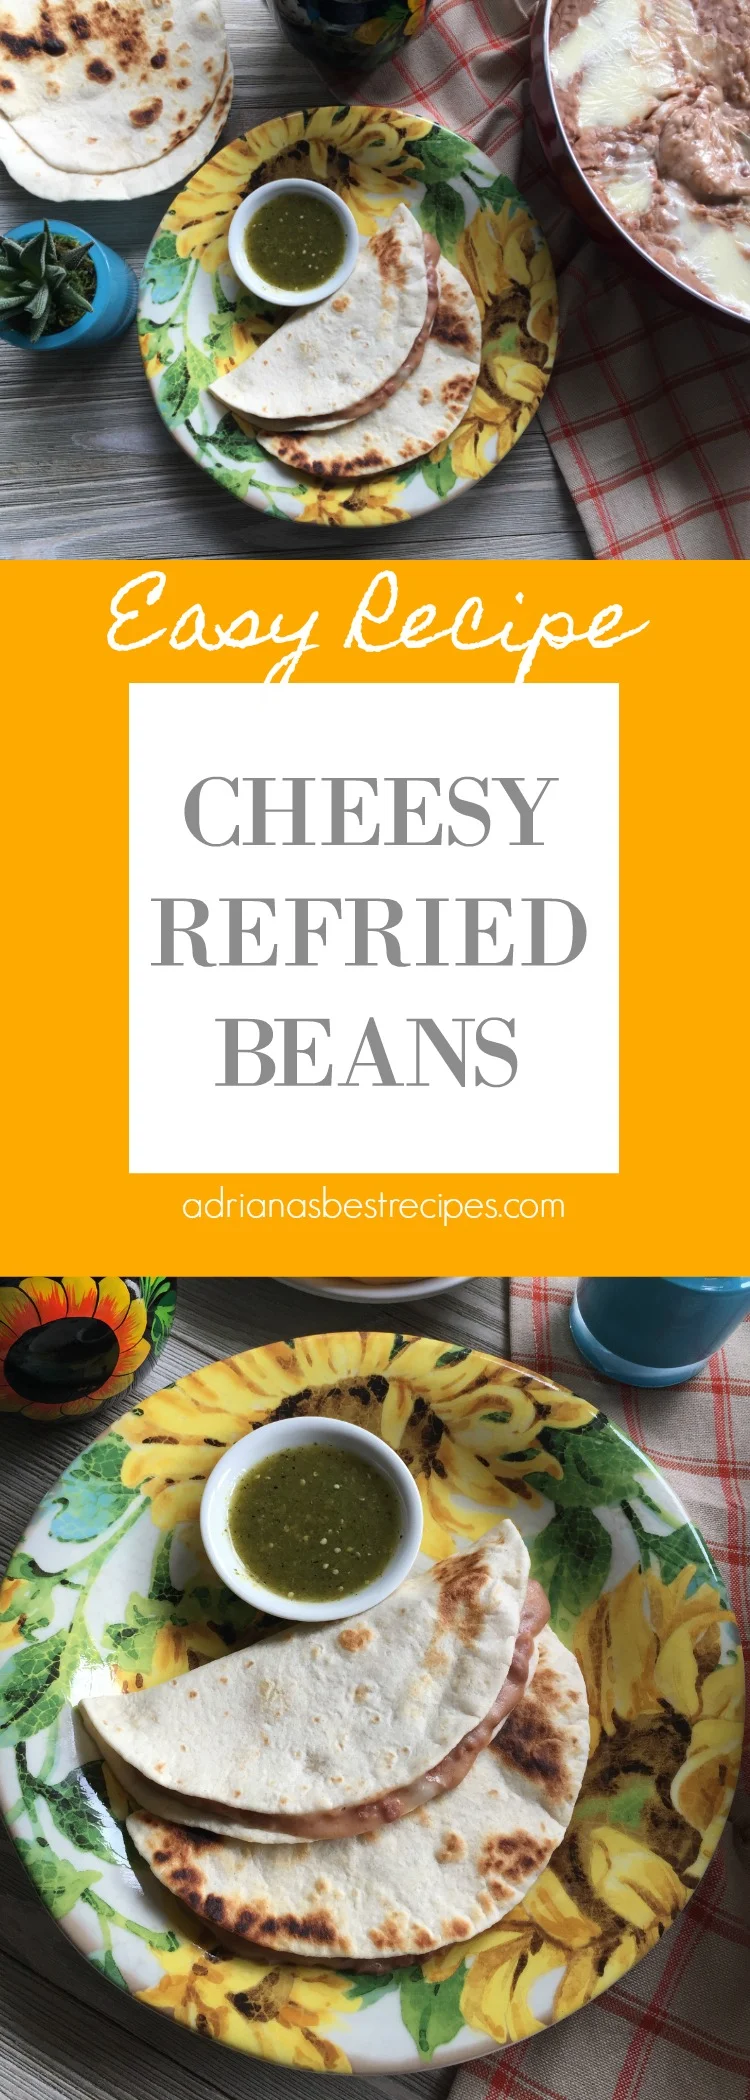 Cheesy refried beans made with Oaxaca cheese and homemade pinto beans or bayos